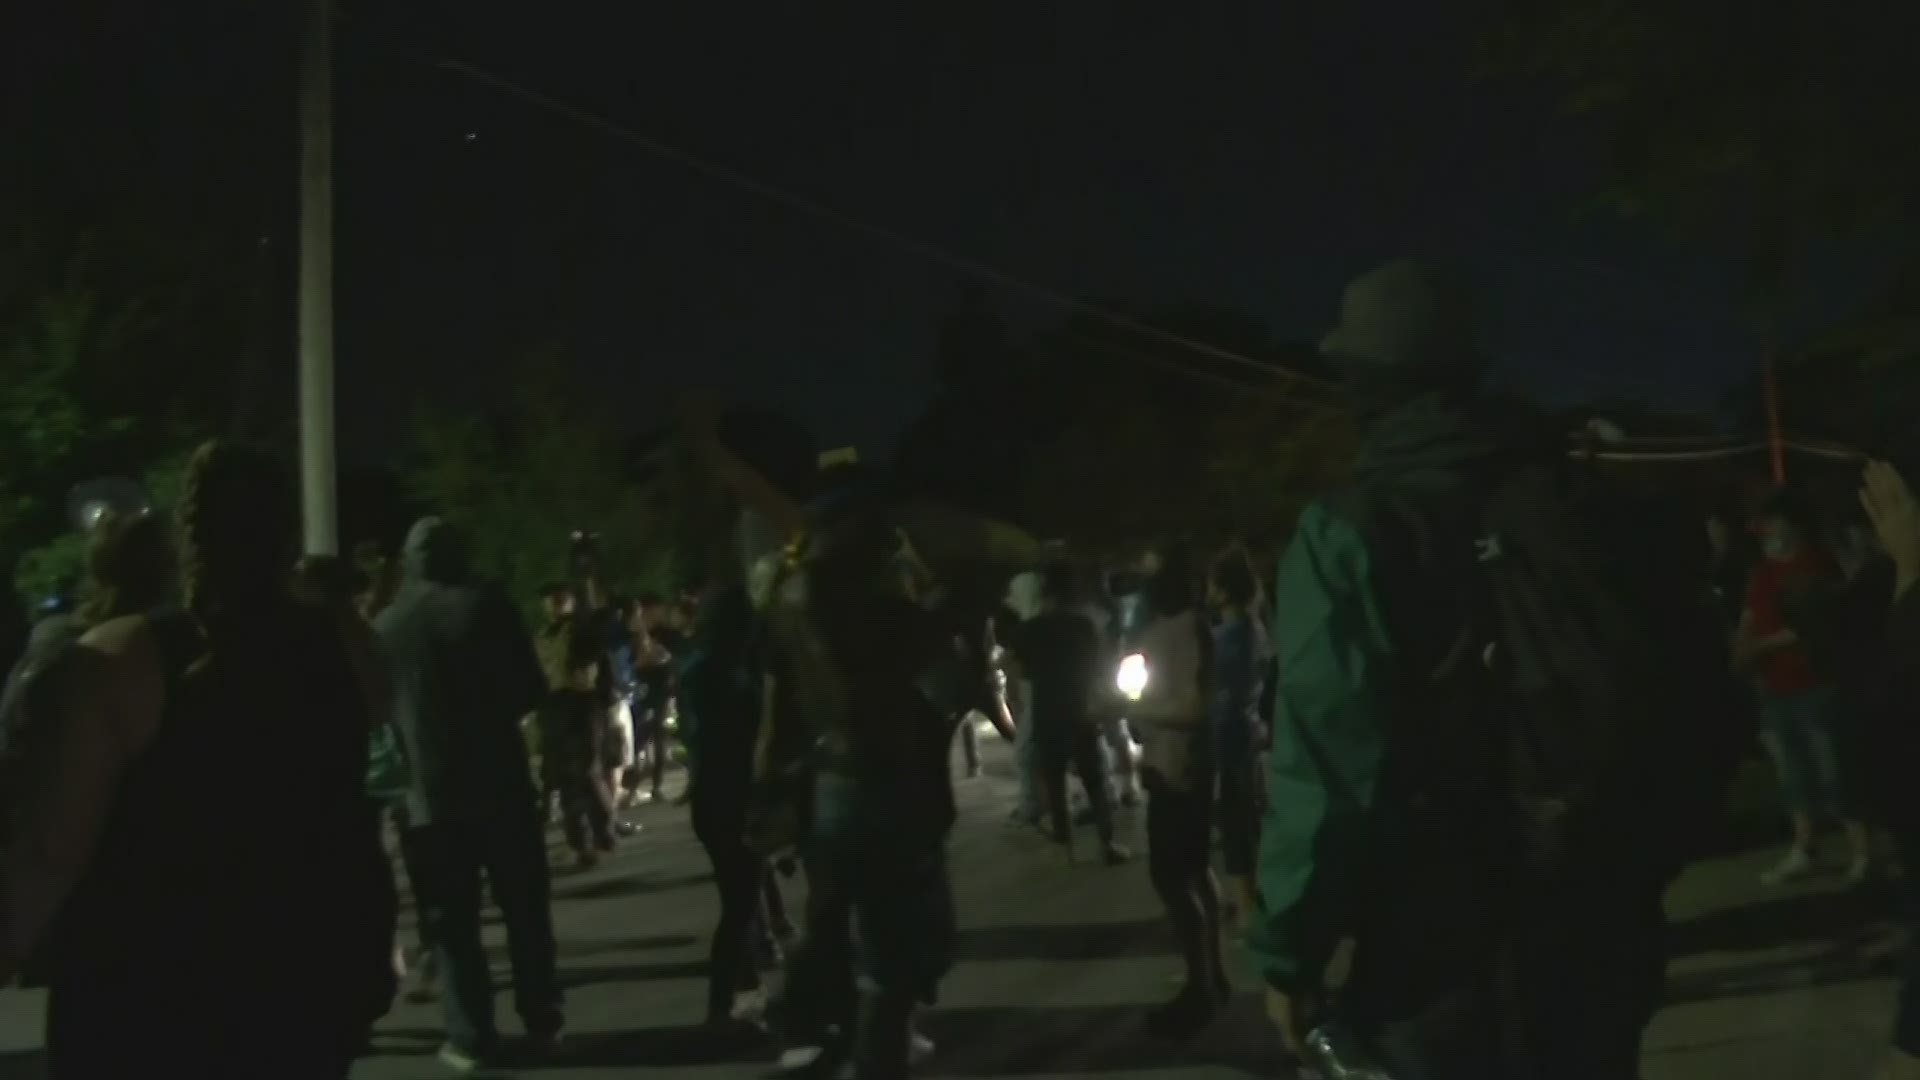 Reports say protests in Kenosha Wednesday night into Thursday were mostly peaceful, in contrast to the violent clashes that marked earlier nights of protests. (AP)